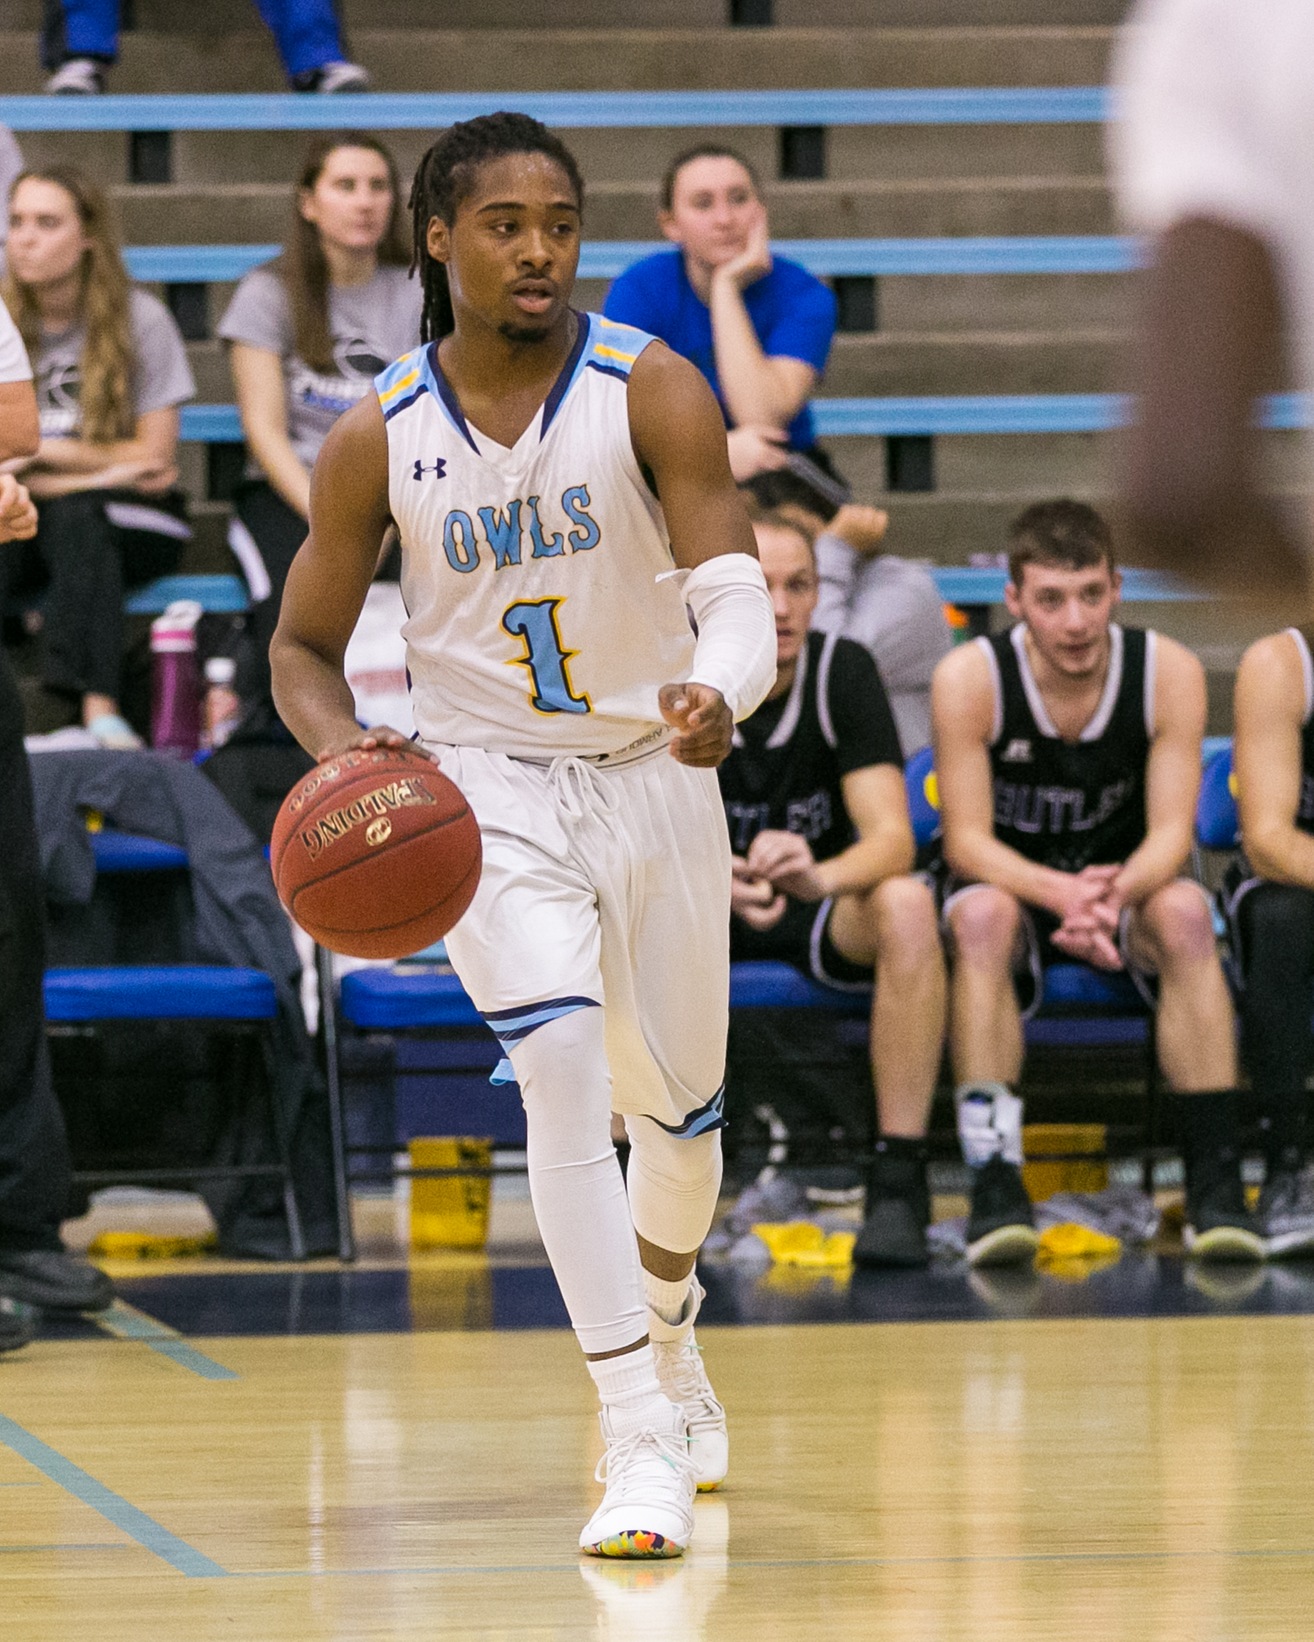 Strong Second Half Lifts Owls Over CCAC Allegheny